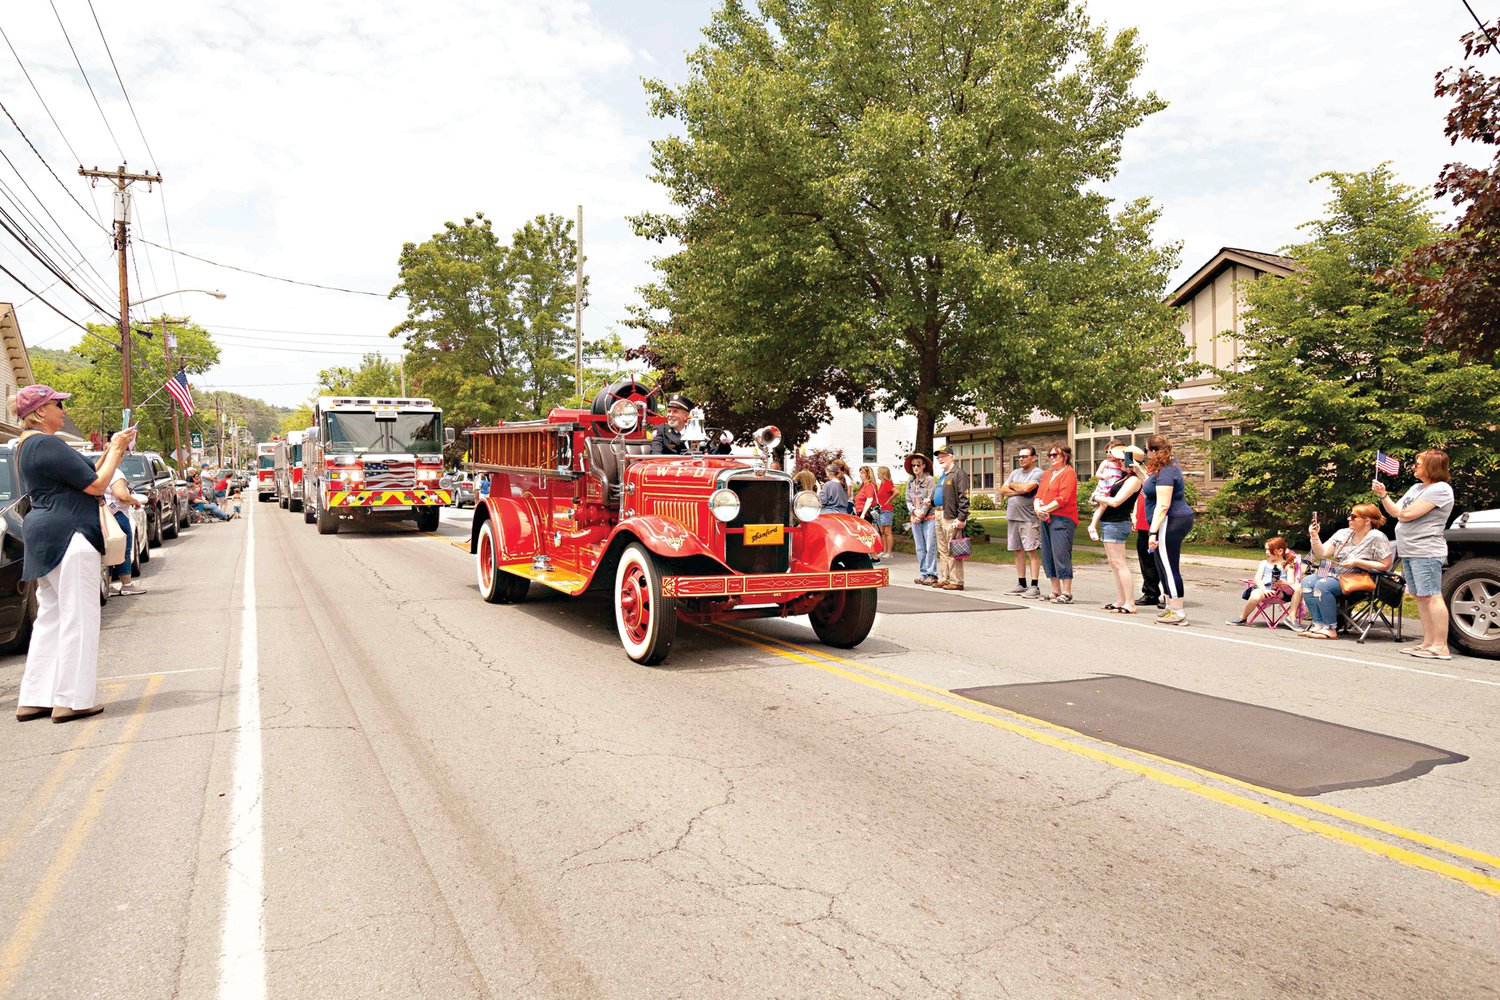 A vintage firetruck from the Wurtsboro Fire Department is always a crowd favorite ​​during the Wurtsboro’s Memorial Day Parade.